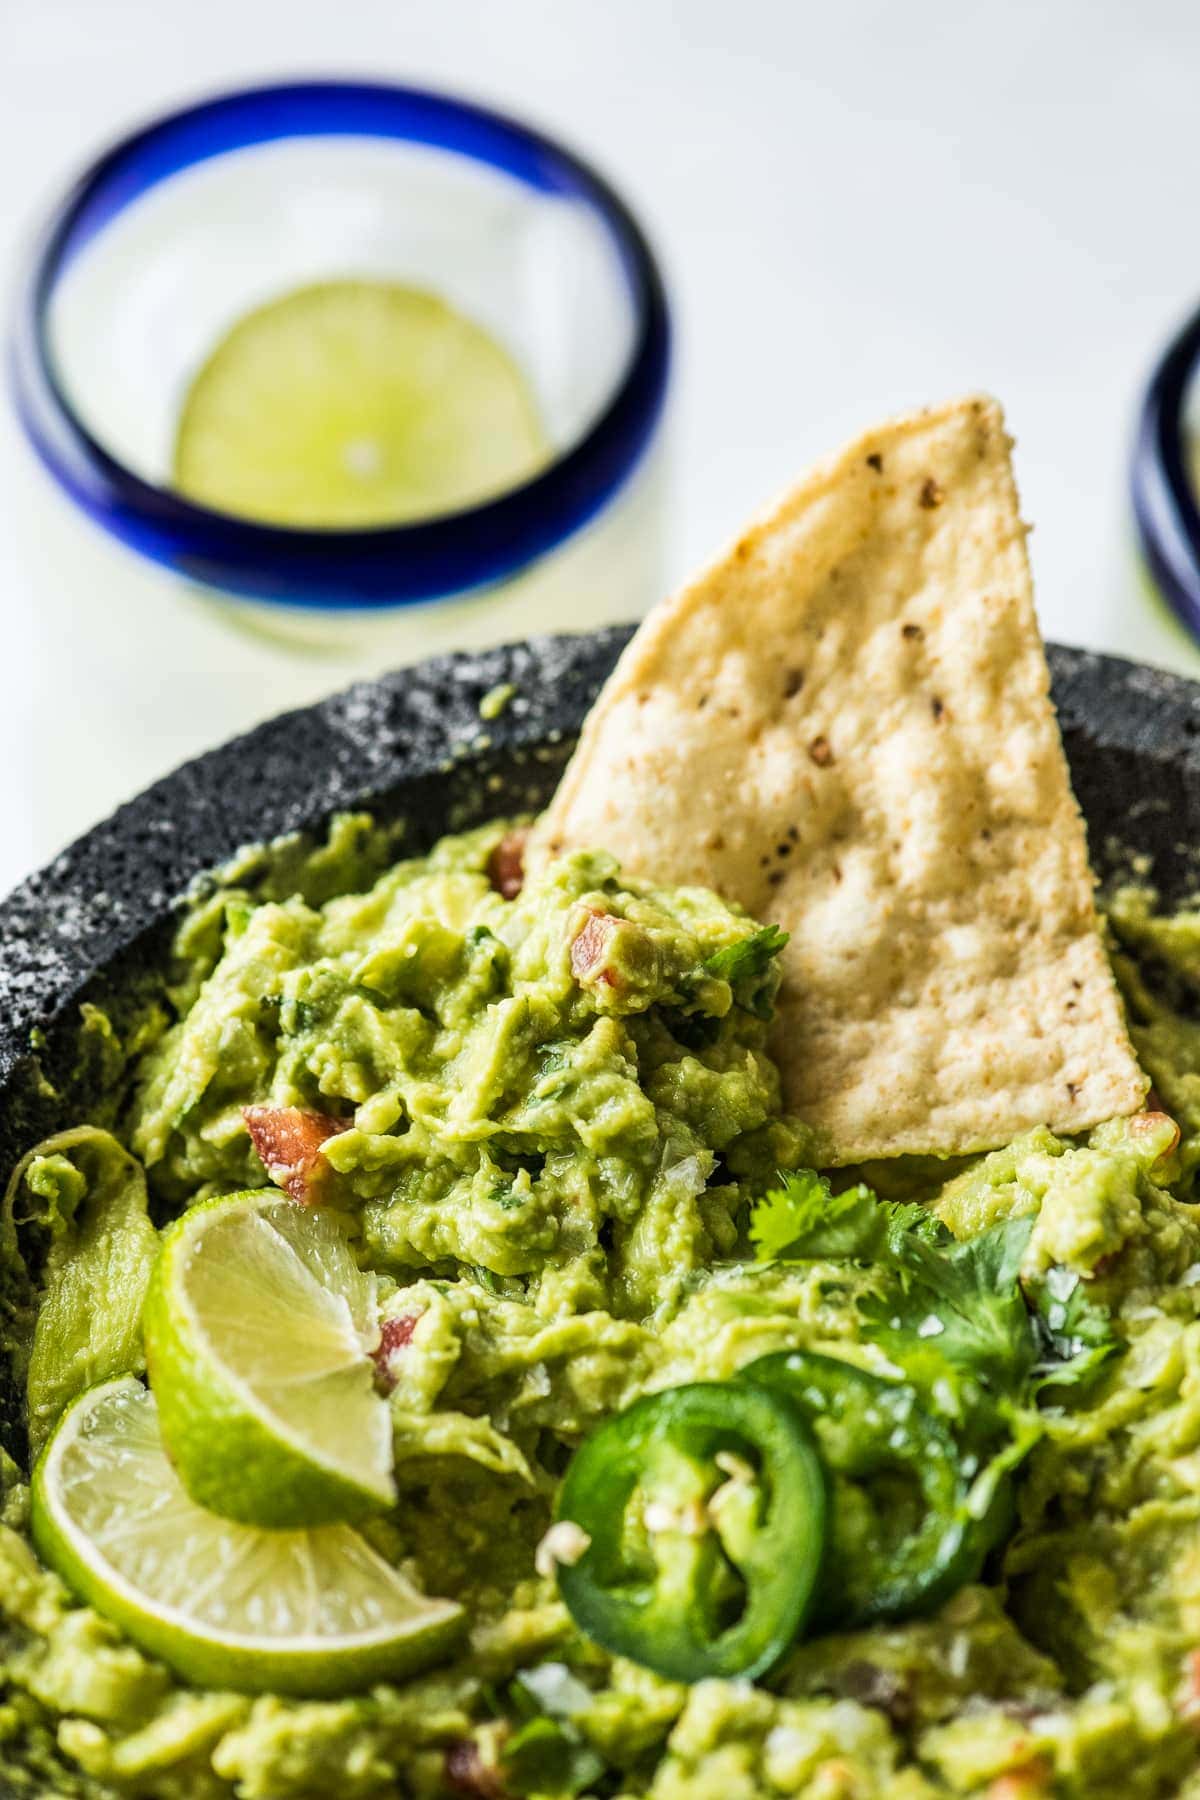 Guacamole in a molcajete with a tortilla chip.